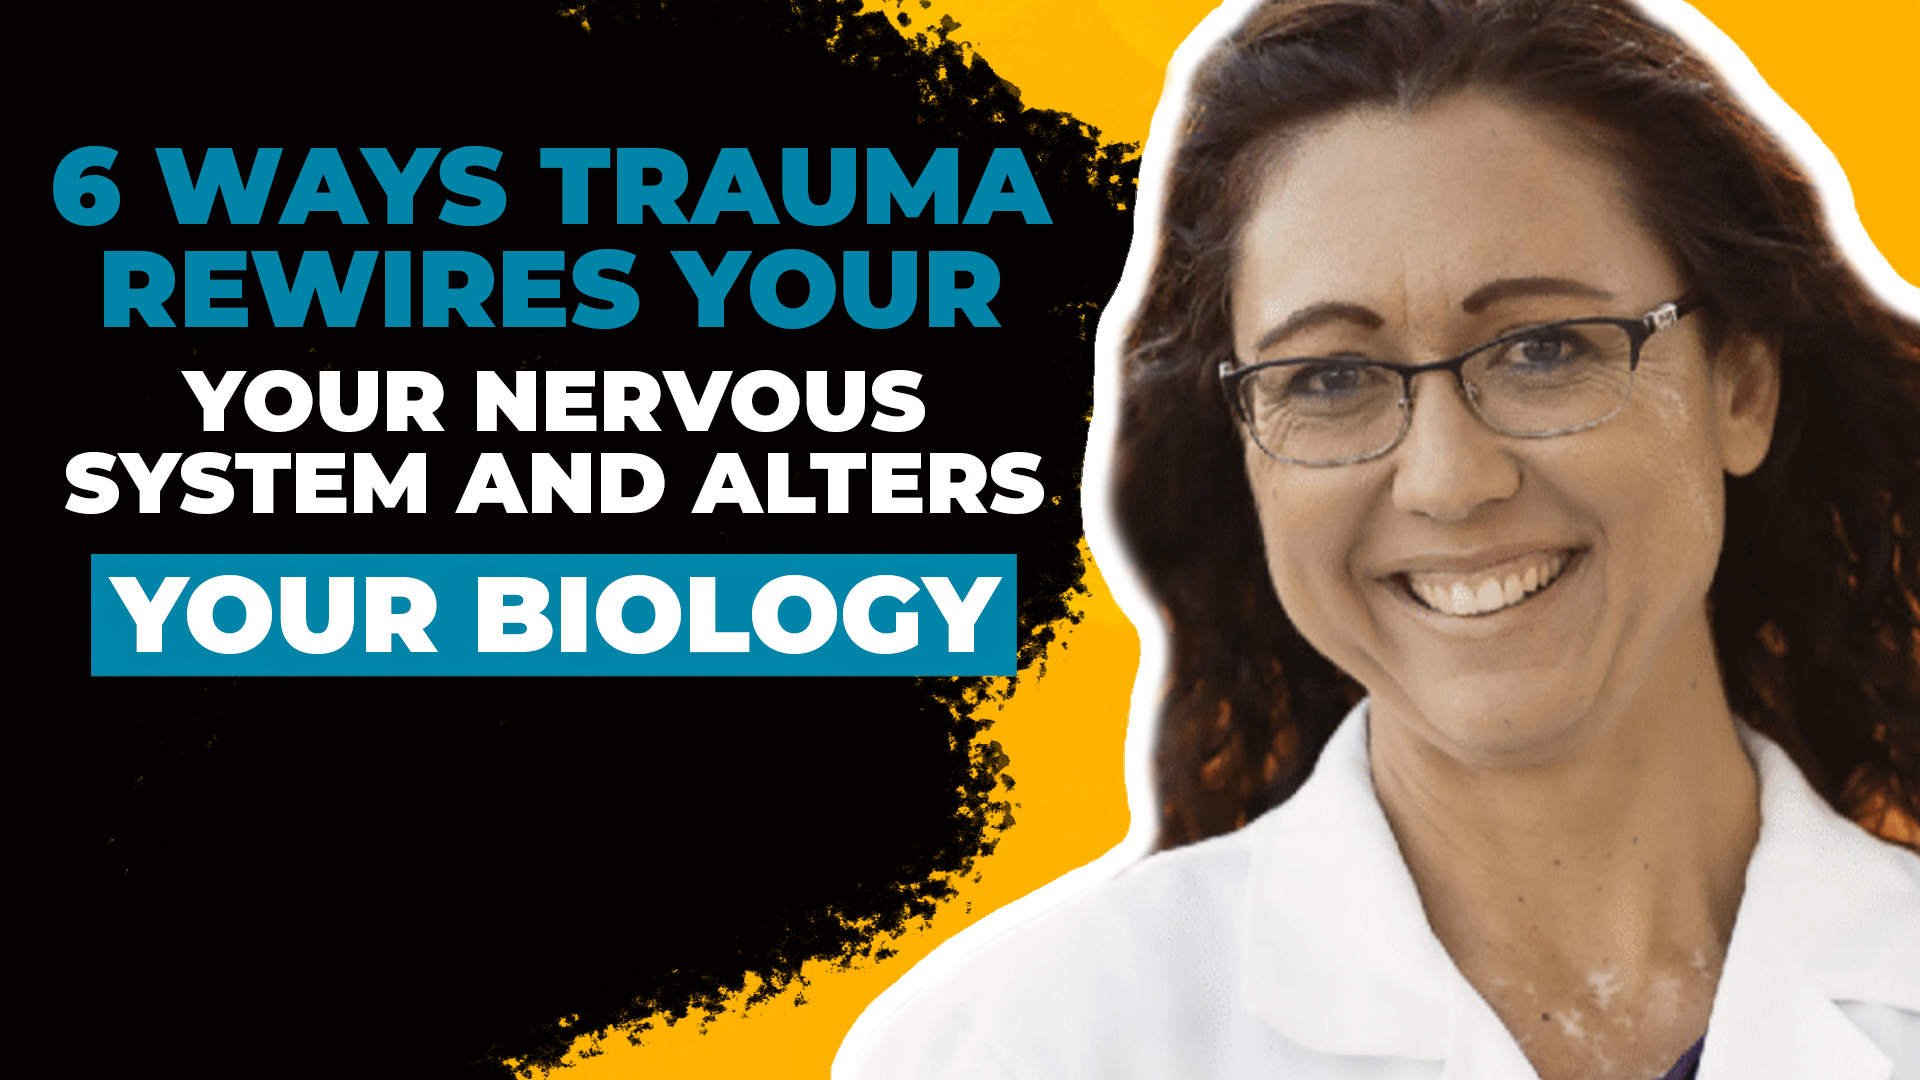 Headshot of Dr. Aimie Apigian on a bold yellow and black background, along with text reading: "6 Ways Trauma Rewires Your Nervous System and Alters Your Biology."